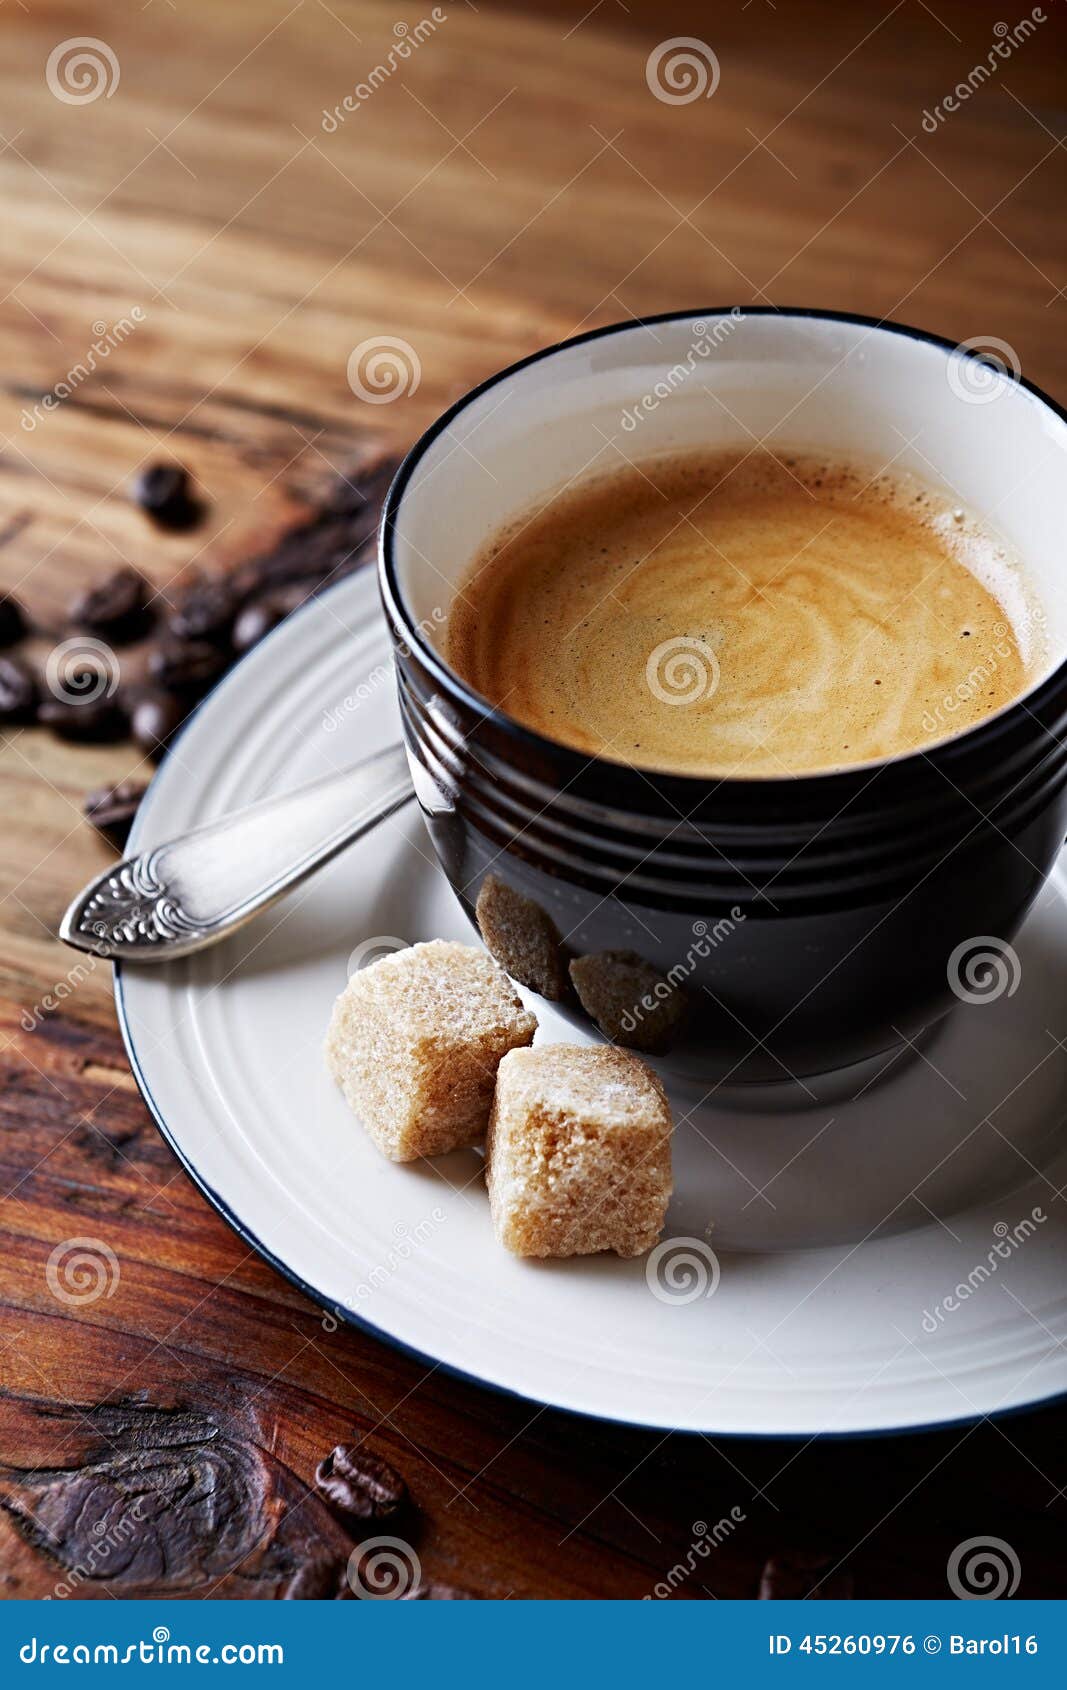 Cup of Coffee with Brown Sugar Stock Photo - Image of espresso, rustic ...